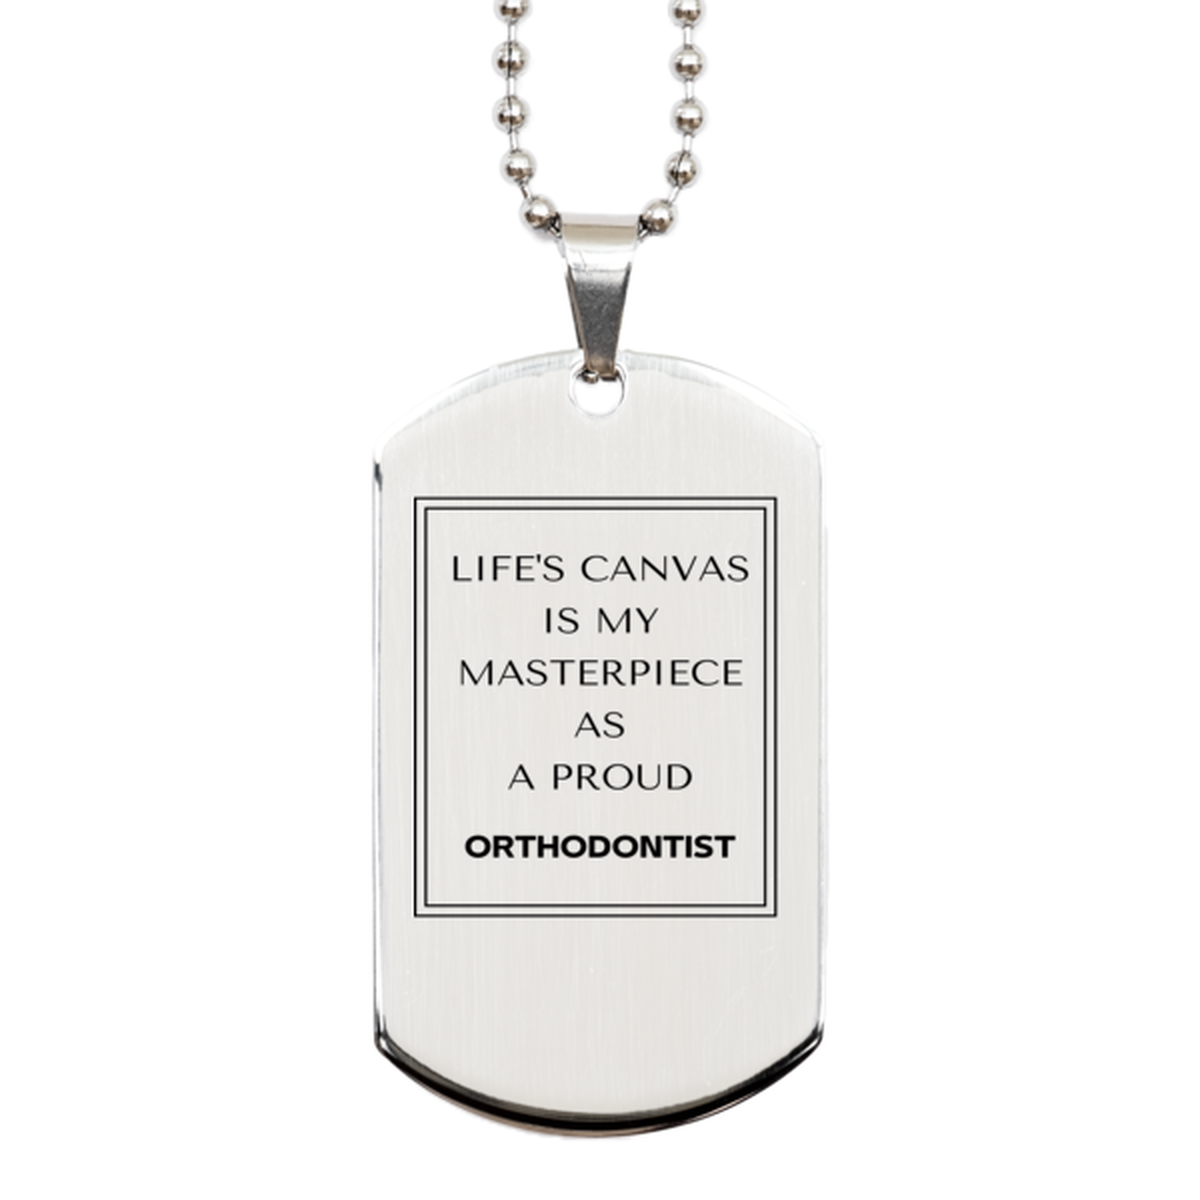 Proud Orthodontist Gifts, Life's canvas is my masterpiece, Epic Birthday Christmas Unique Silver Dog Tag For Orthodontist, Coworkers, Men, Women, Friends